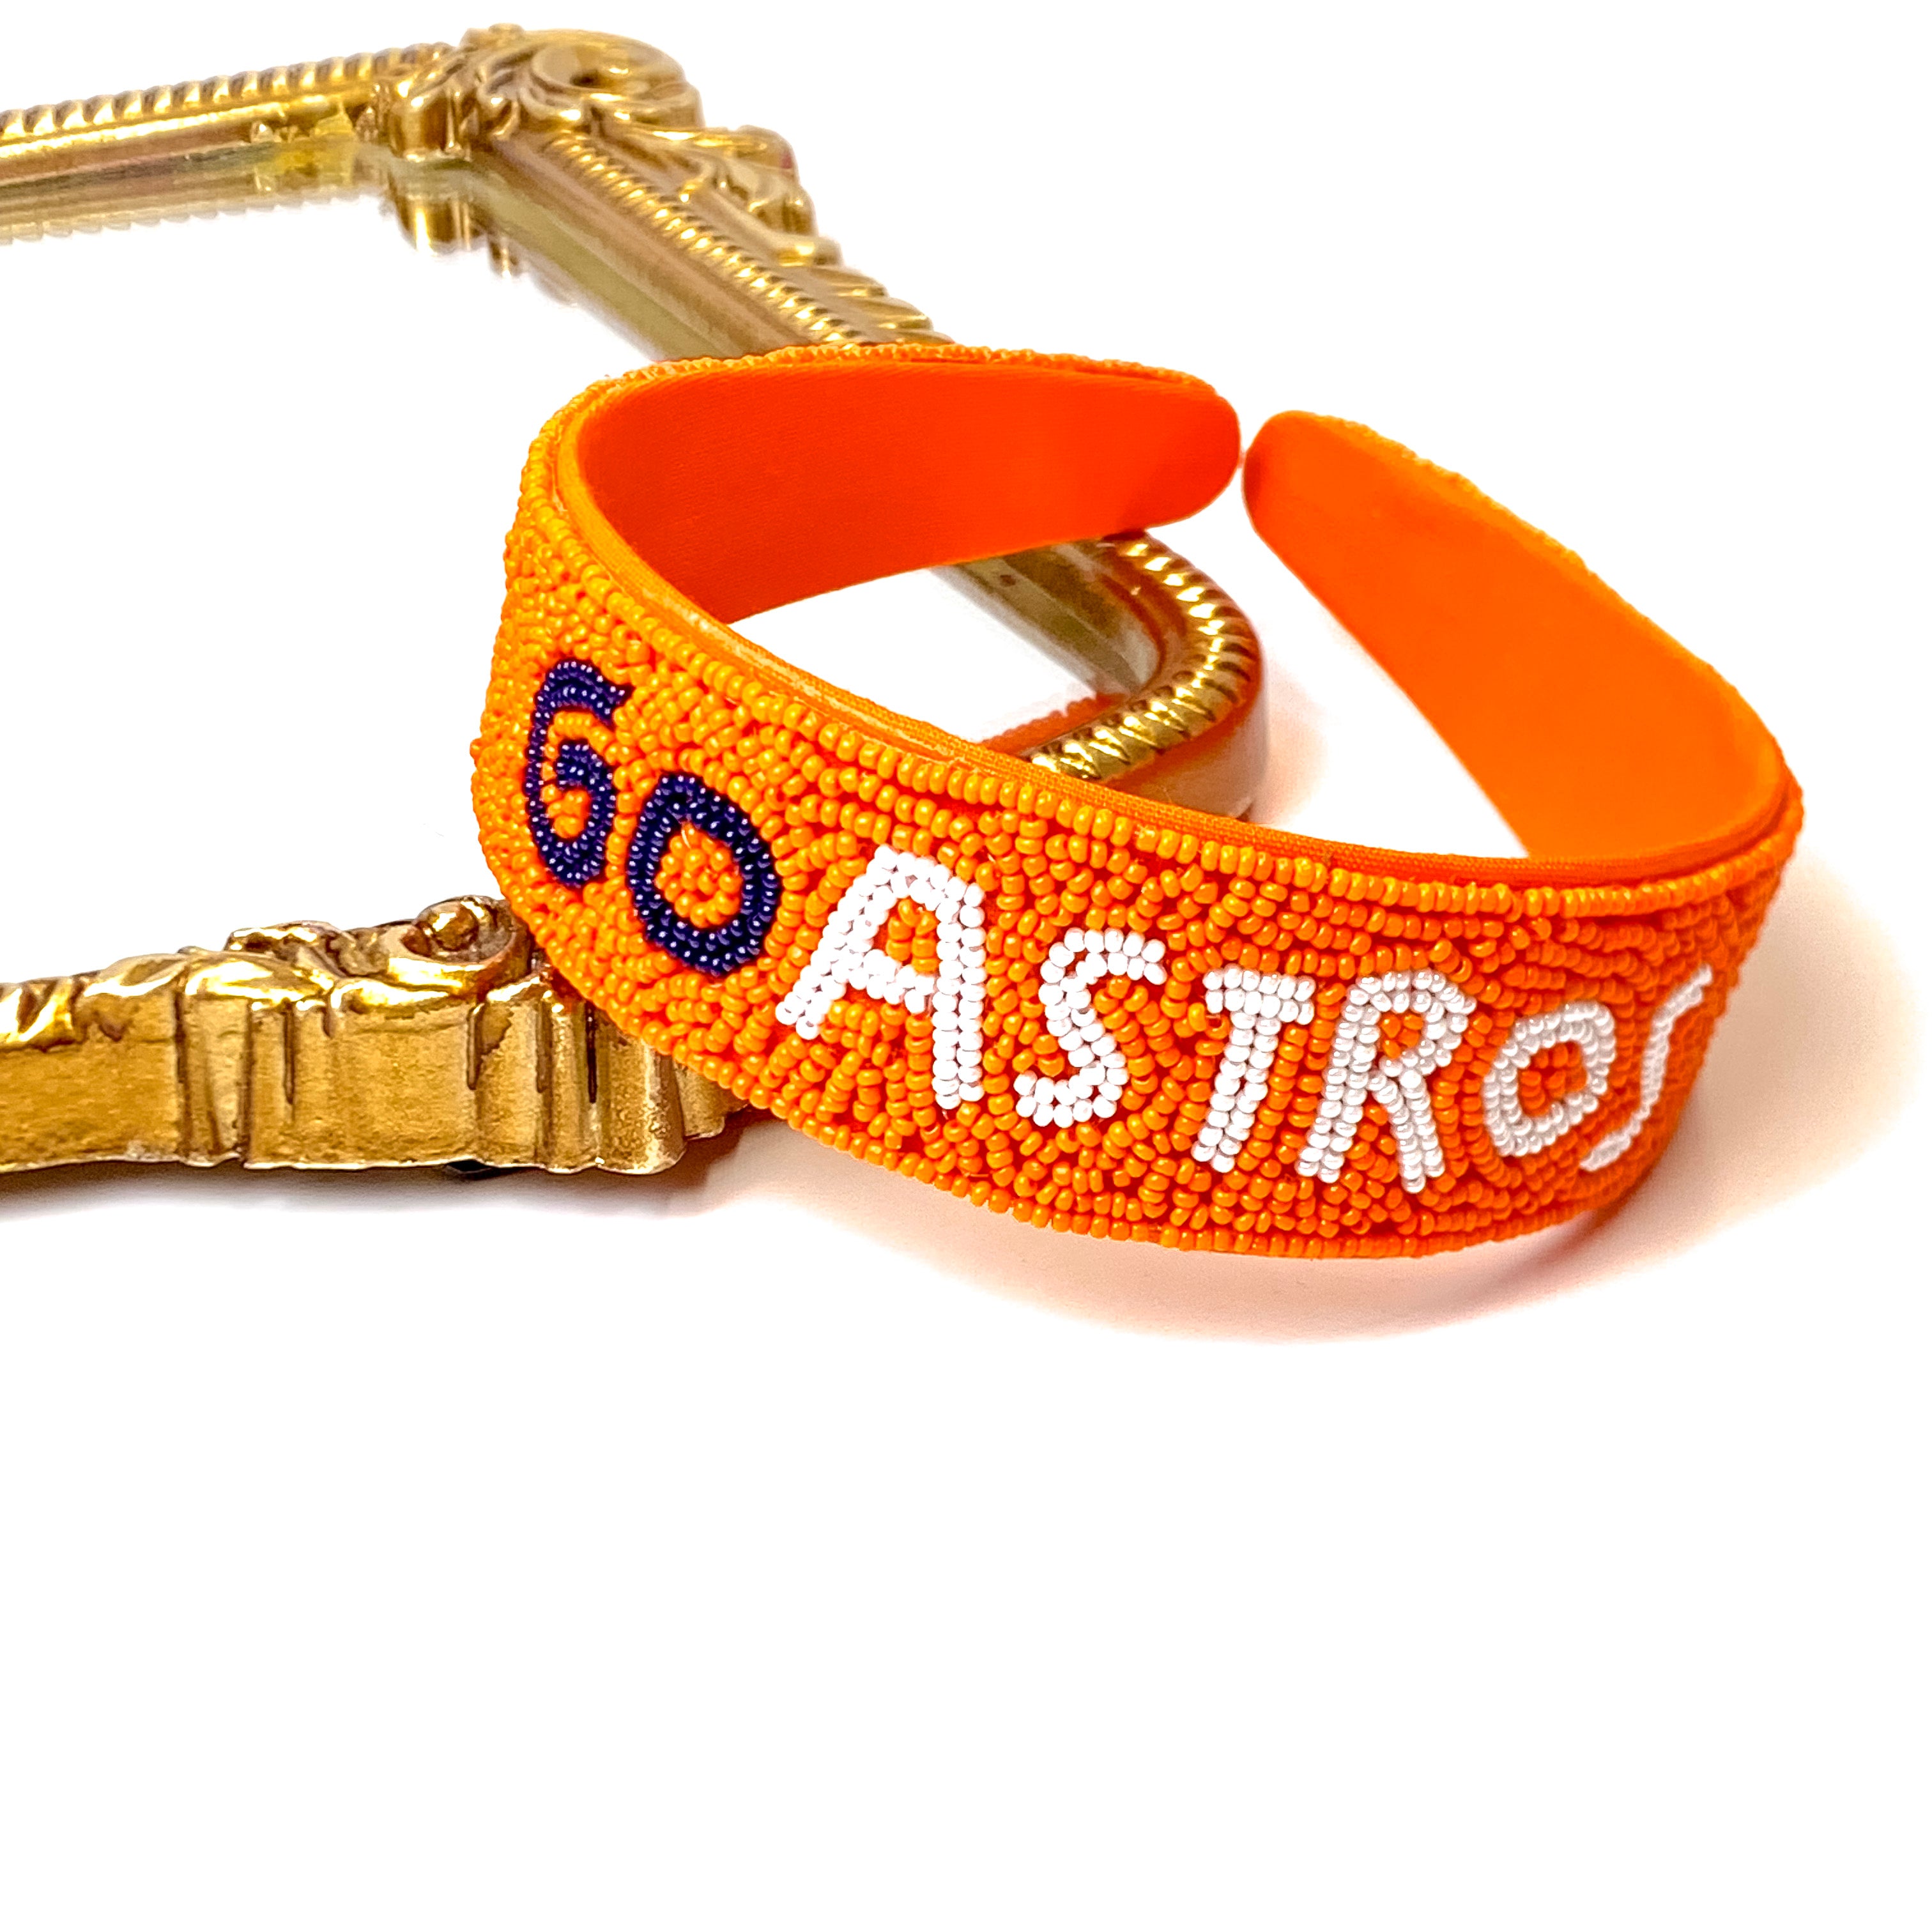 Go Astros Orange, Navy Blue, and White Seed Bead Headband - Giddy Up Glamour Boutique